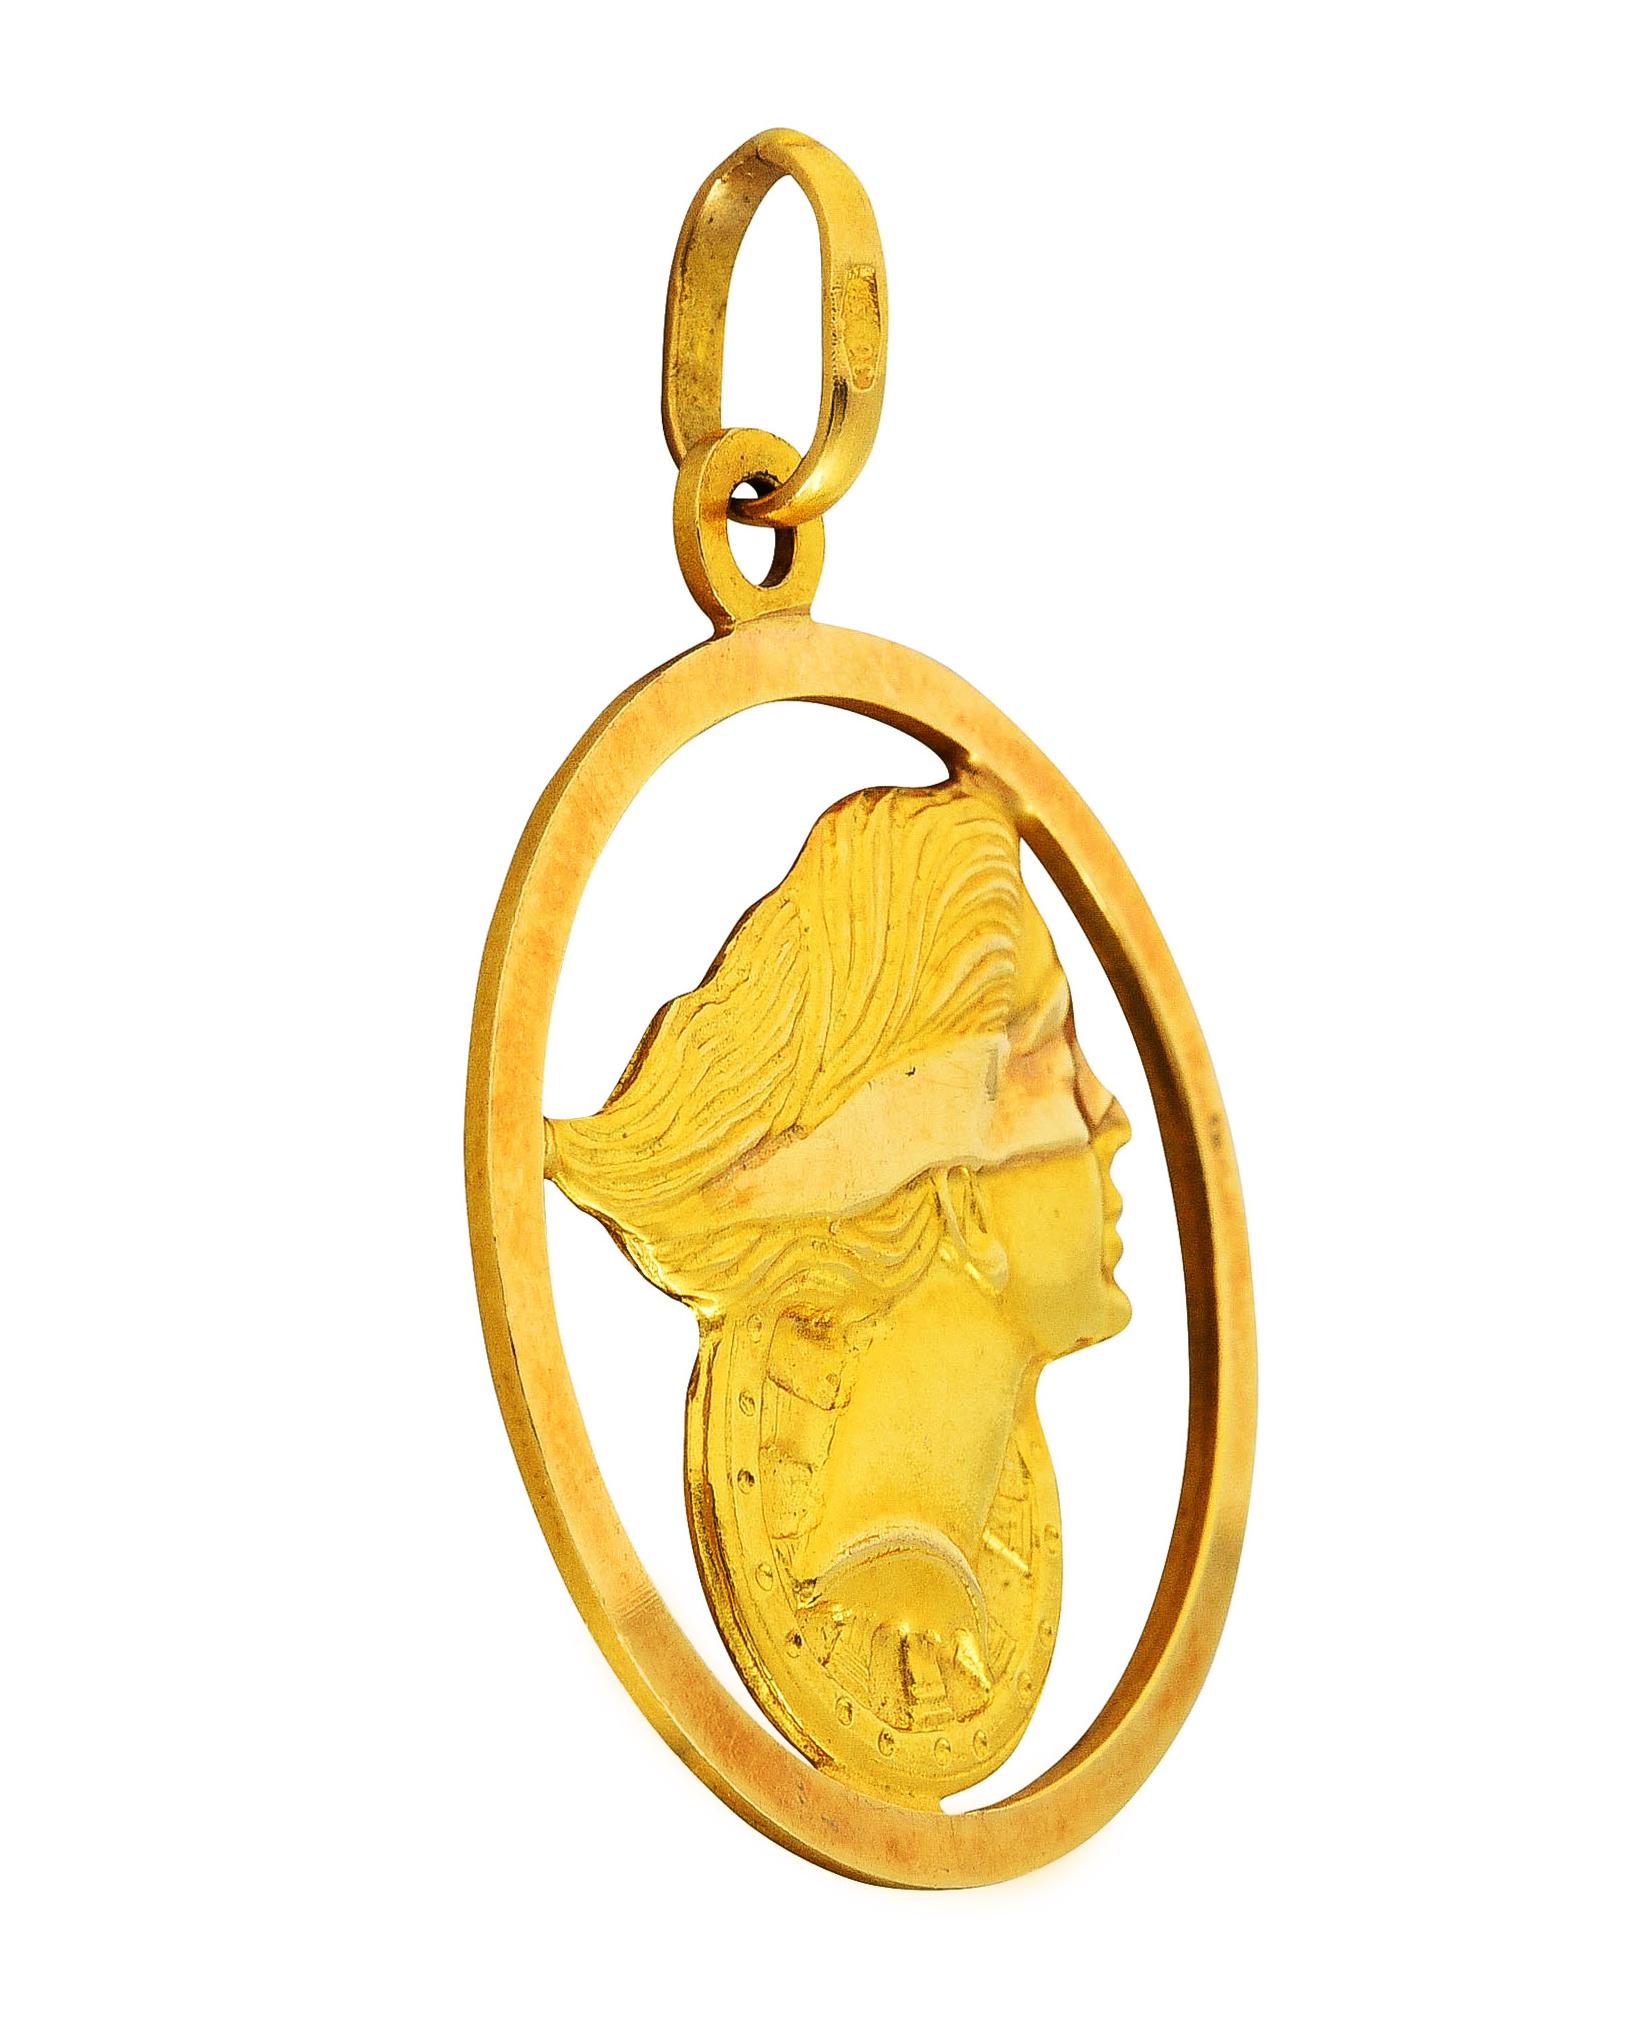 Pendant design as circular framed depiction of the Roman goddess Fortuna 

Fortuna is depicted as profile of a blindfolded woman in front of the wheel of fortune 

Featuring matte gold engraved hair and wheel with high polished blindfold 

Fortuna